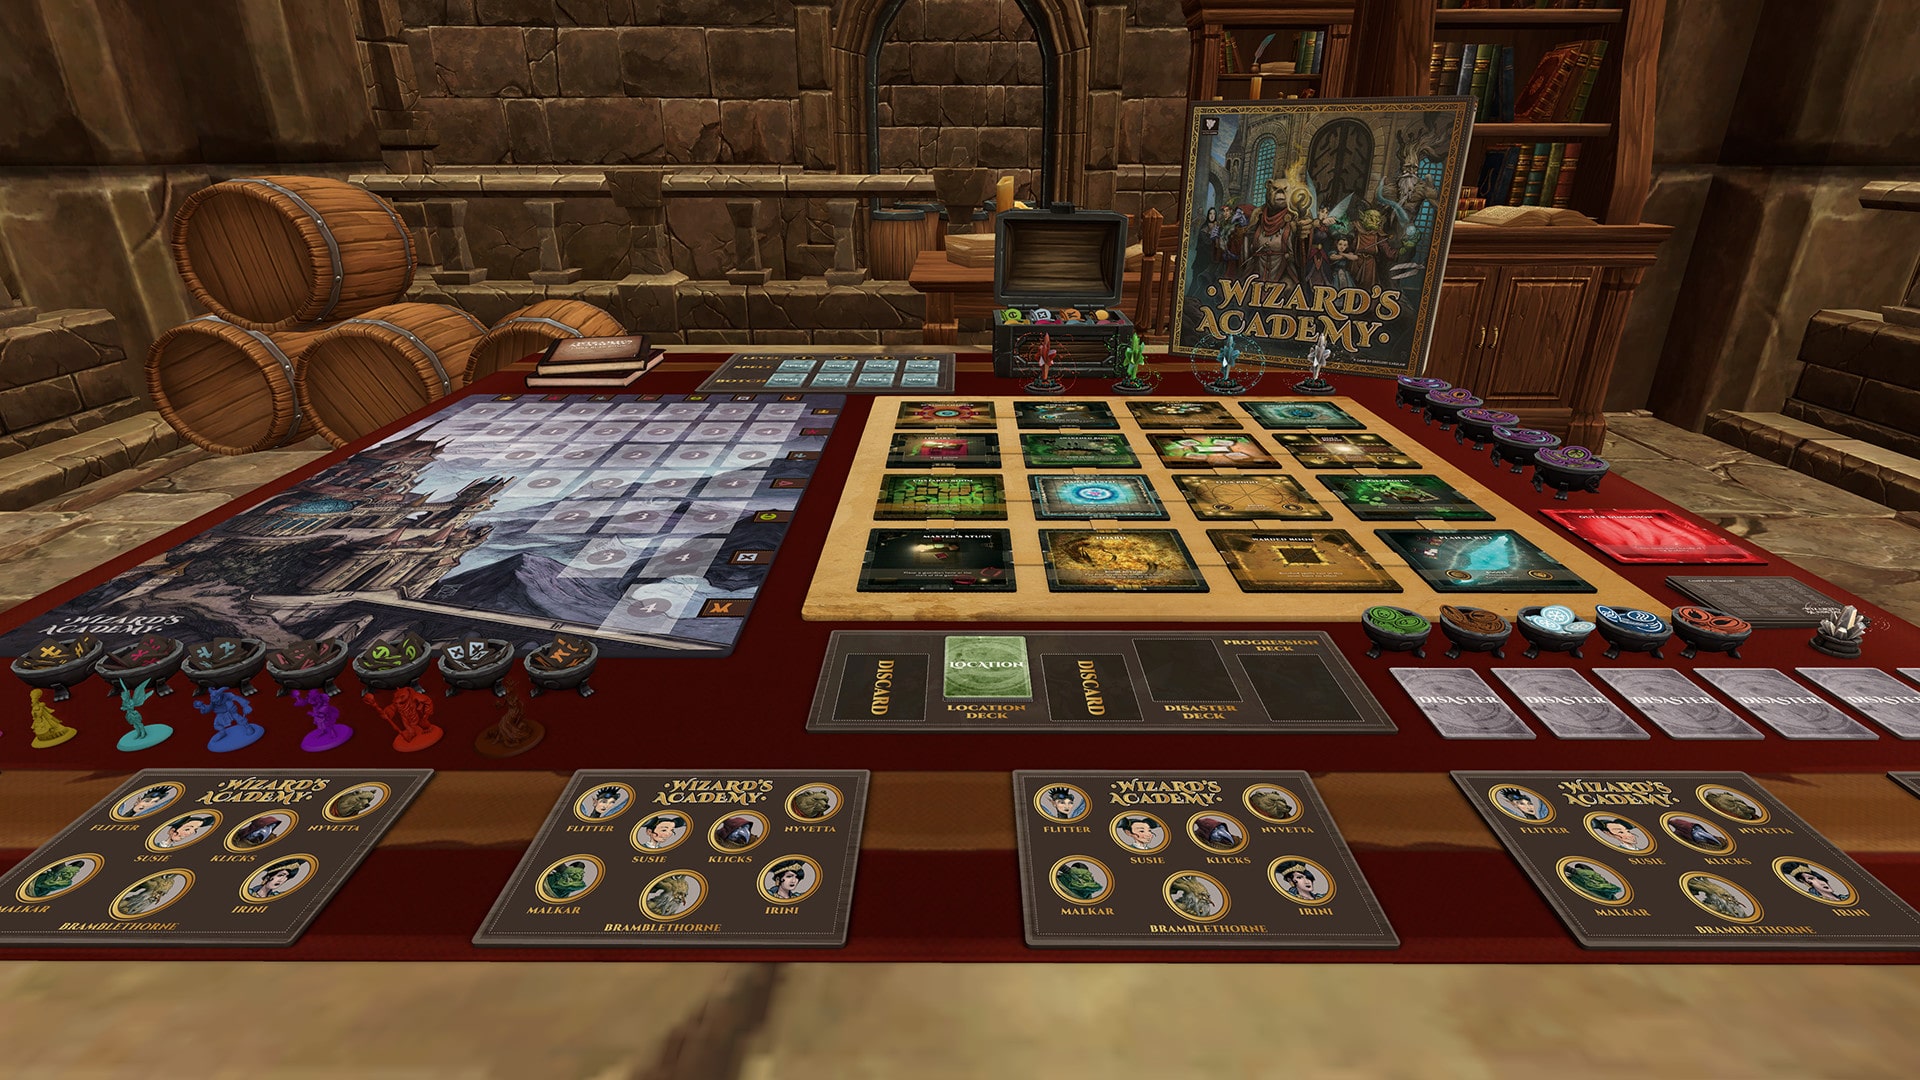 Screenshot of Tabletop Simulator showing a virtual gaming environment with various board game elements and tools, illustrating its versatility in digital board gaming.